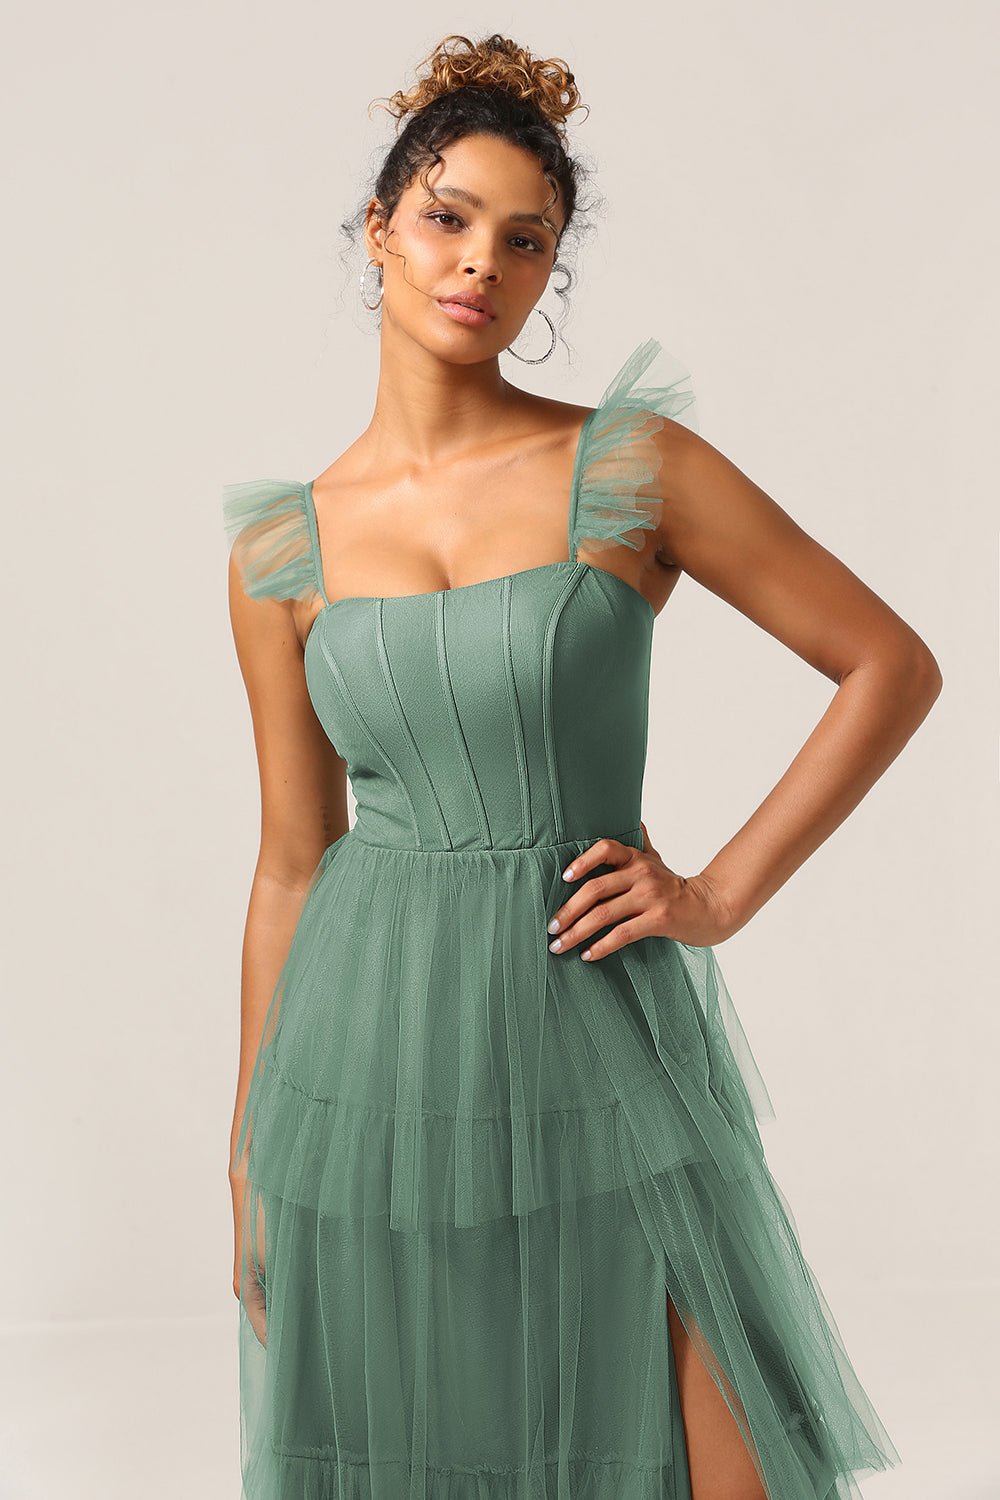 Dusty Blue Detachable Straps A Line Tiered Bridesmaid Dress with Slit